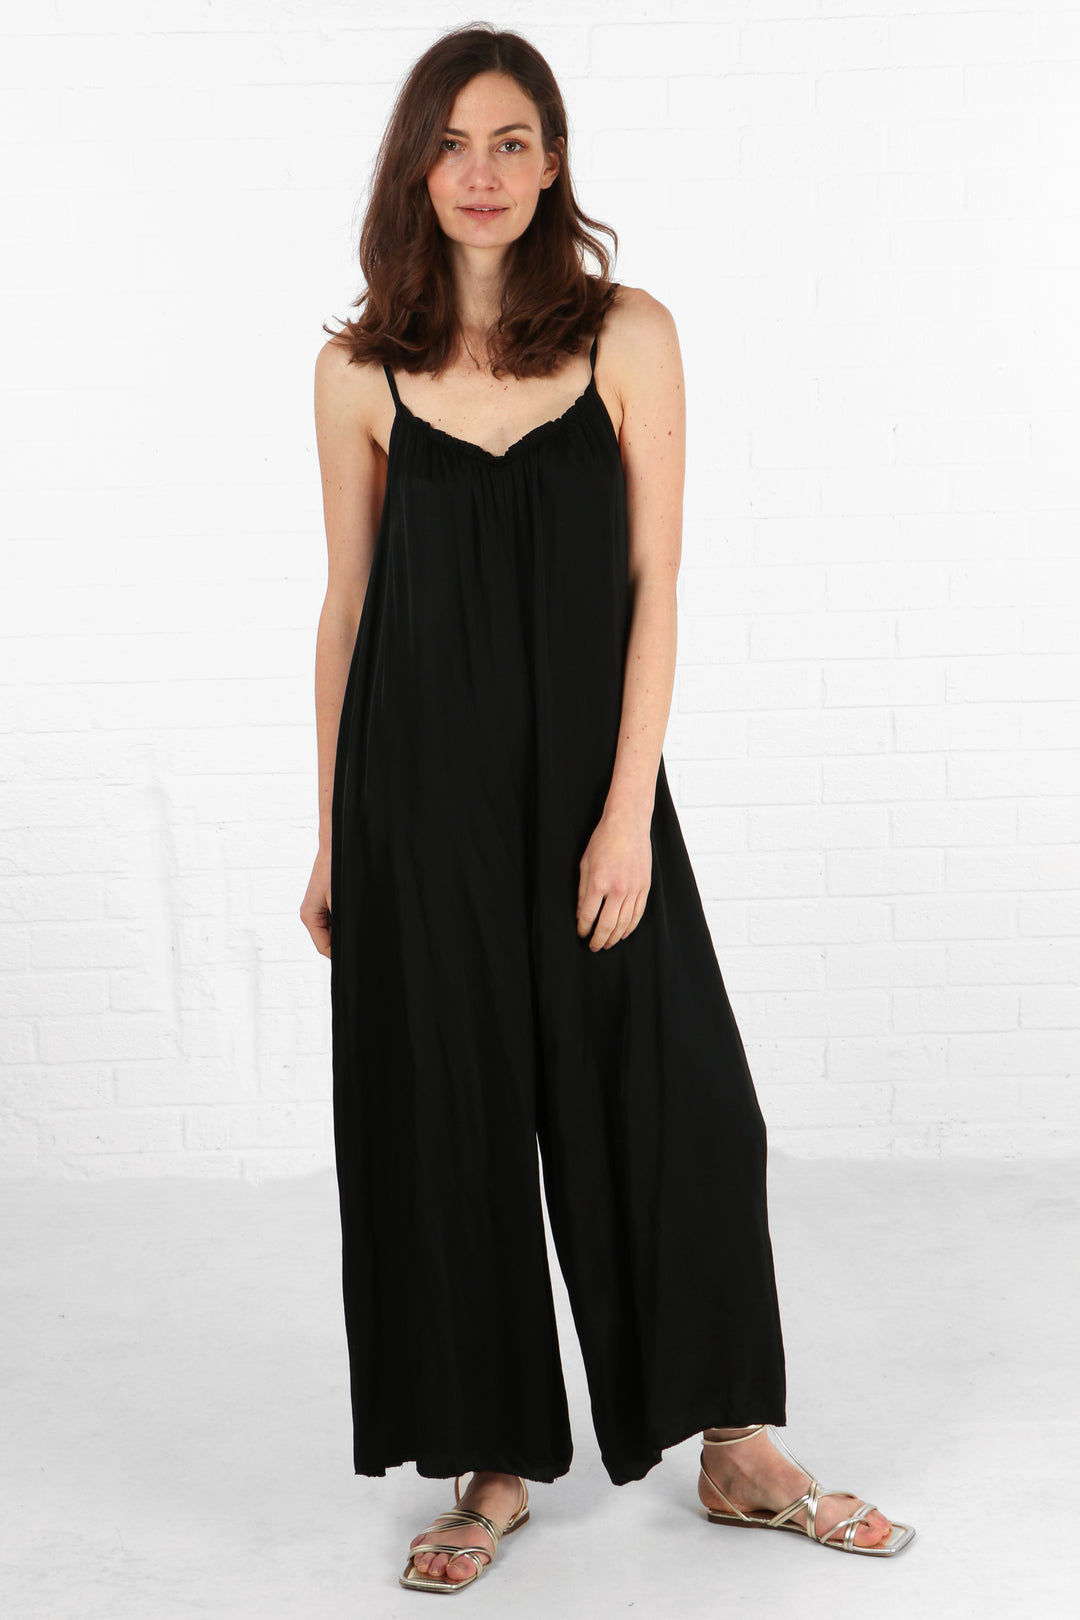 model wearing an black wide leg jumpsuit with a v neck and spaghetti straps